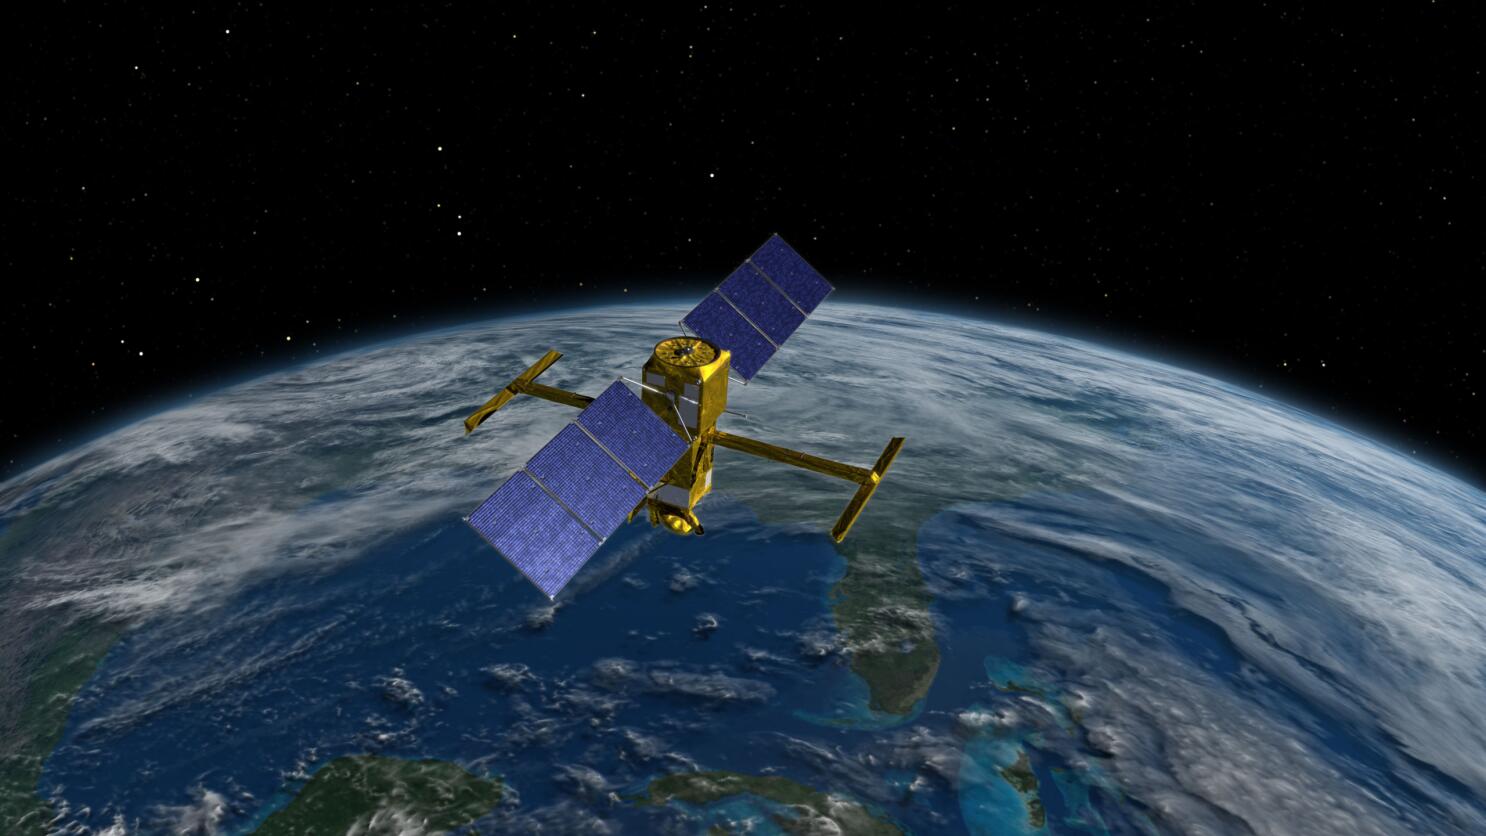 Hydrology From Space: Scientific Advances and Future